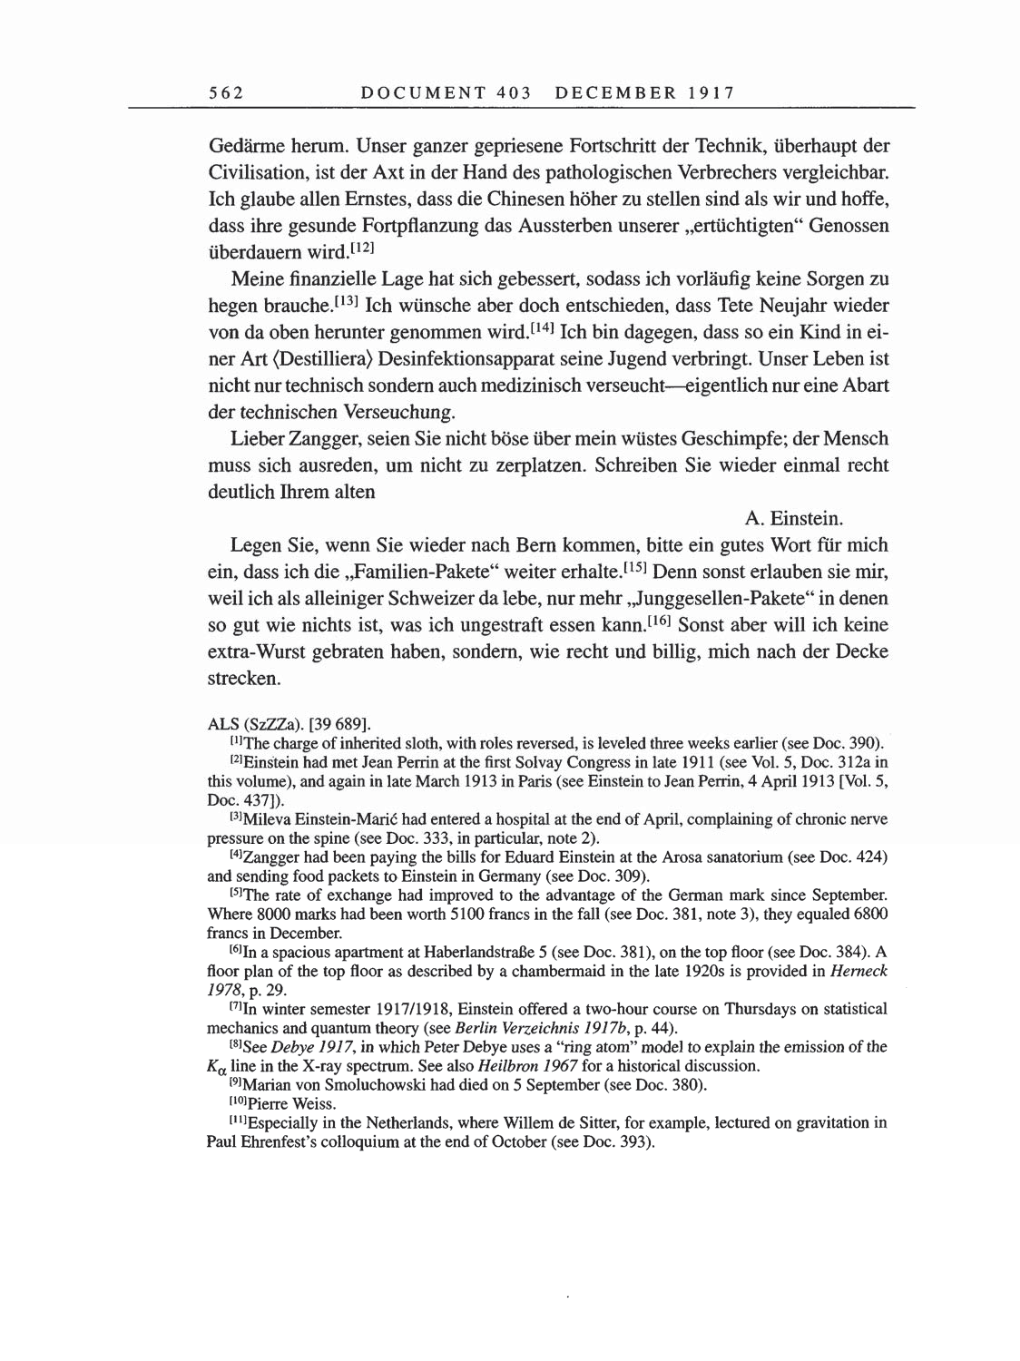 Volume 8, Part A: The Berlin Years: Correspondence 1914-1917 page 562